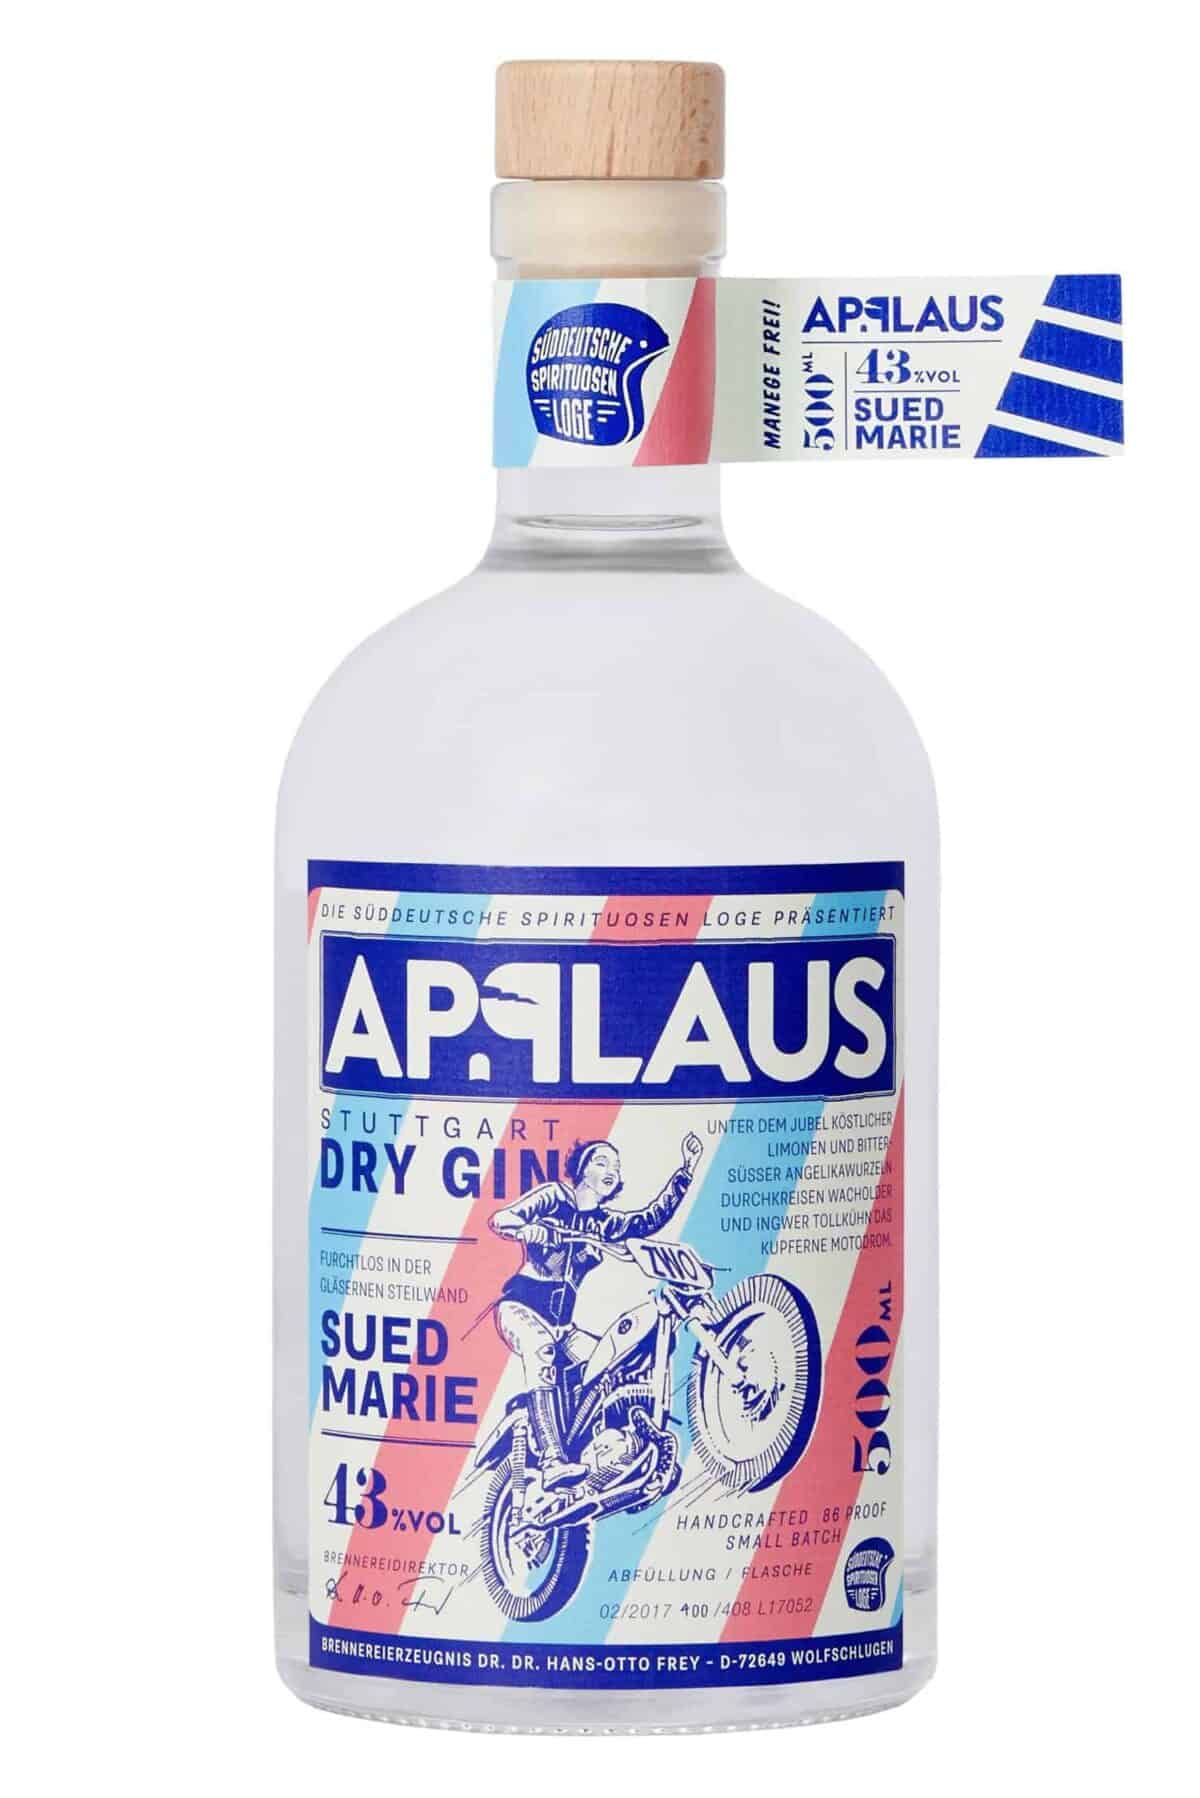 Applaus Dry Gin - Sued Marie